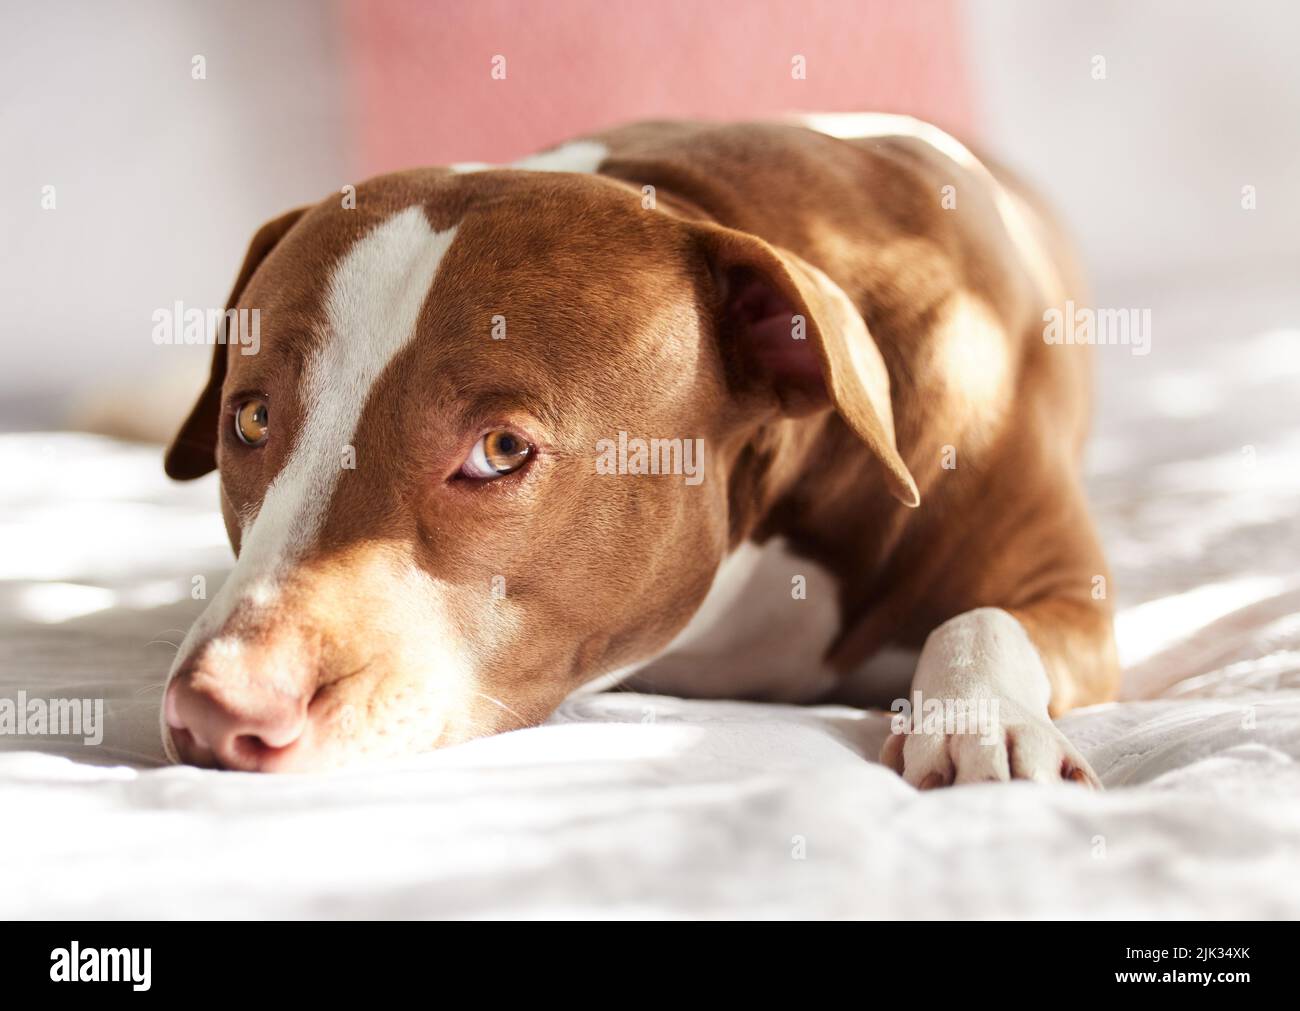 Mr. Steal your heart. Portrait of an adorably sweet dog relaxing on a bed at home. Stock Photo